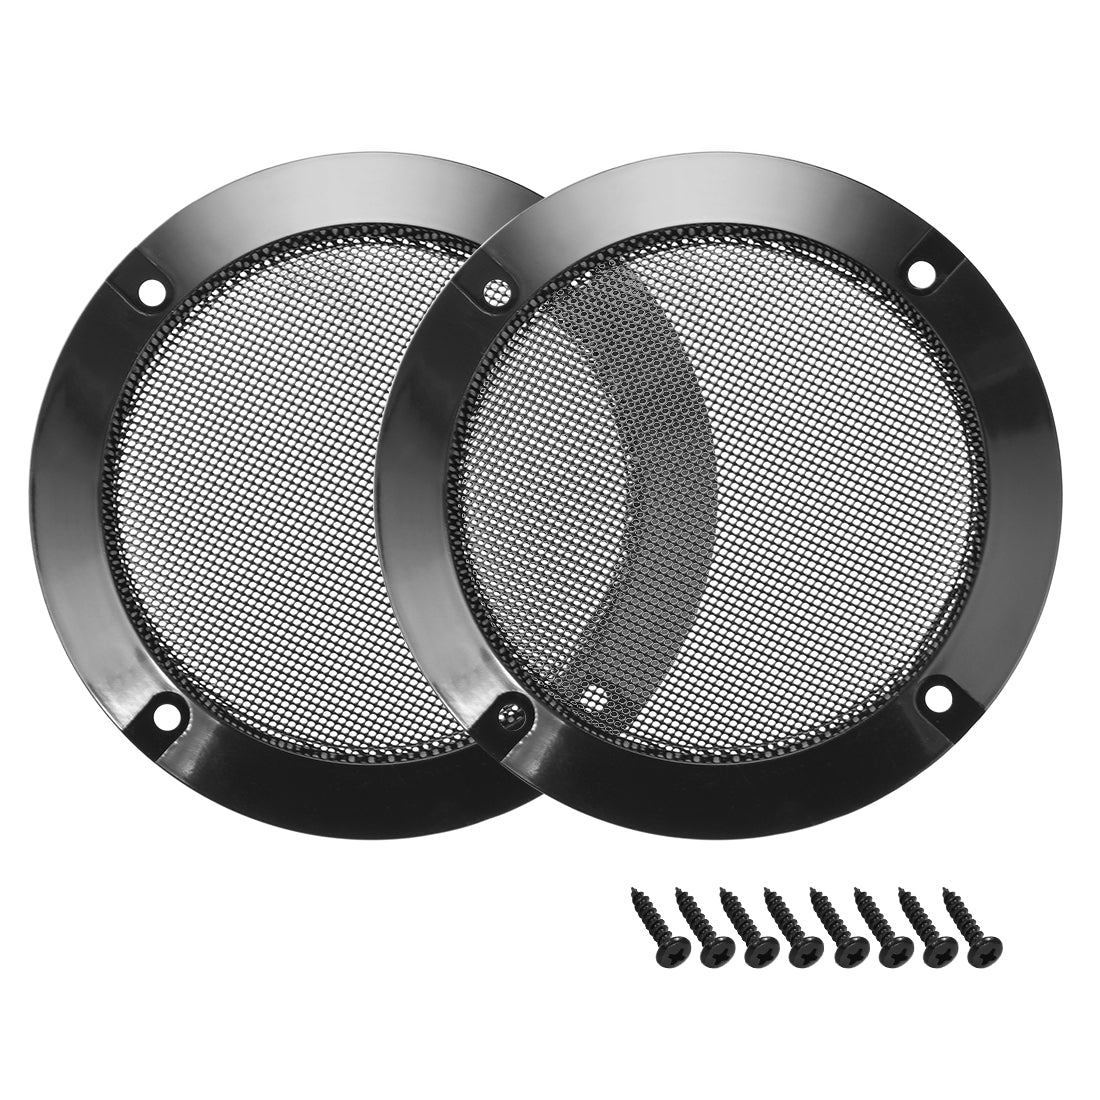 uxcell Uxcell 2pcs 4" Grill Mesh Decorative Circle Woofer Guard Protector Cover Parts Black